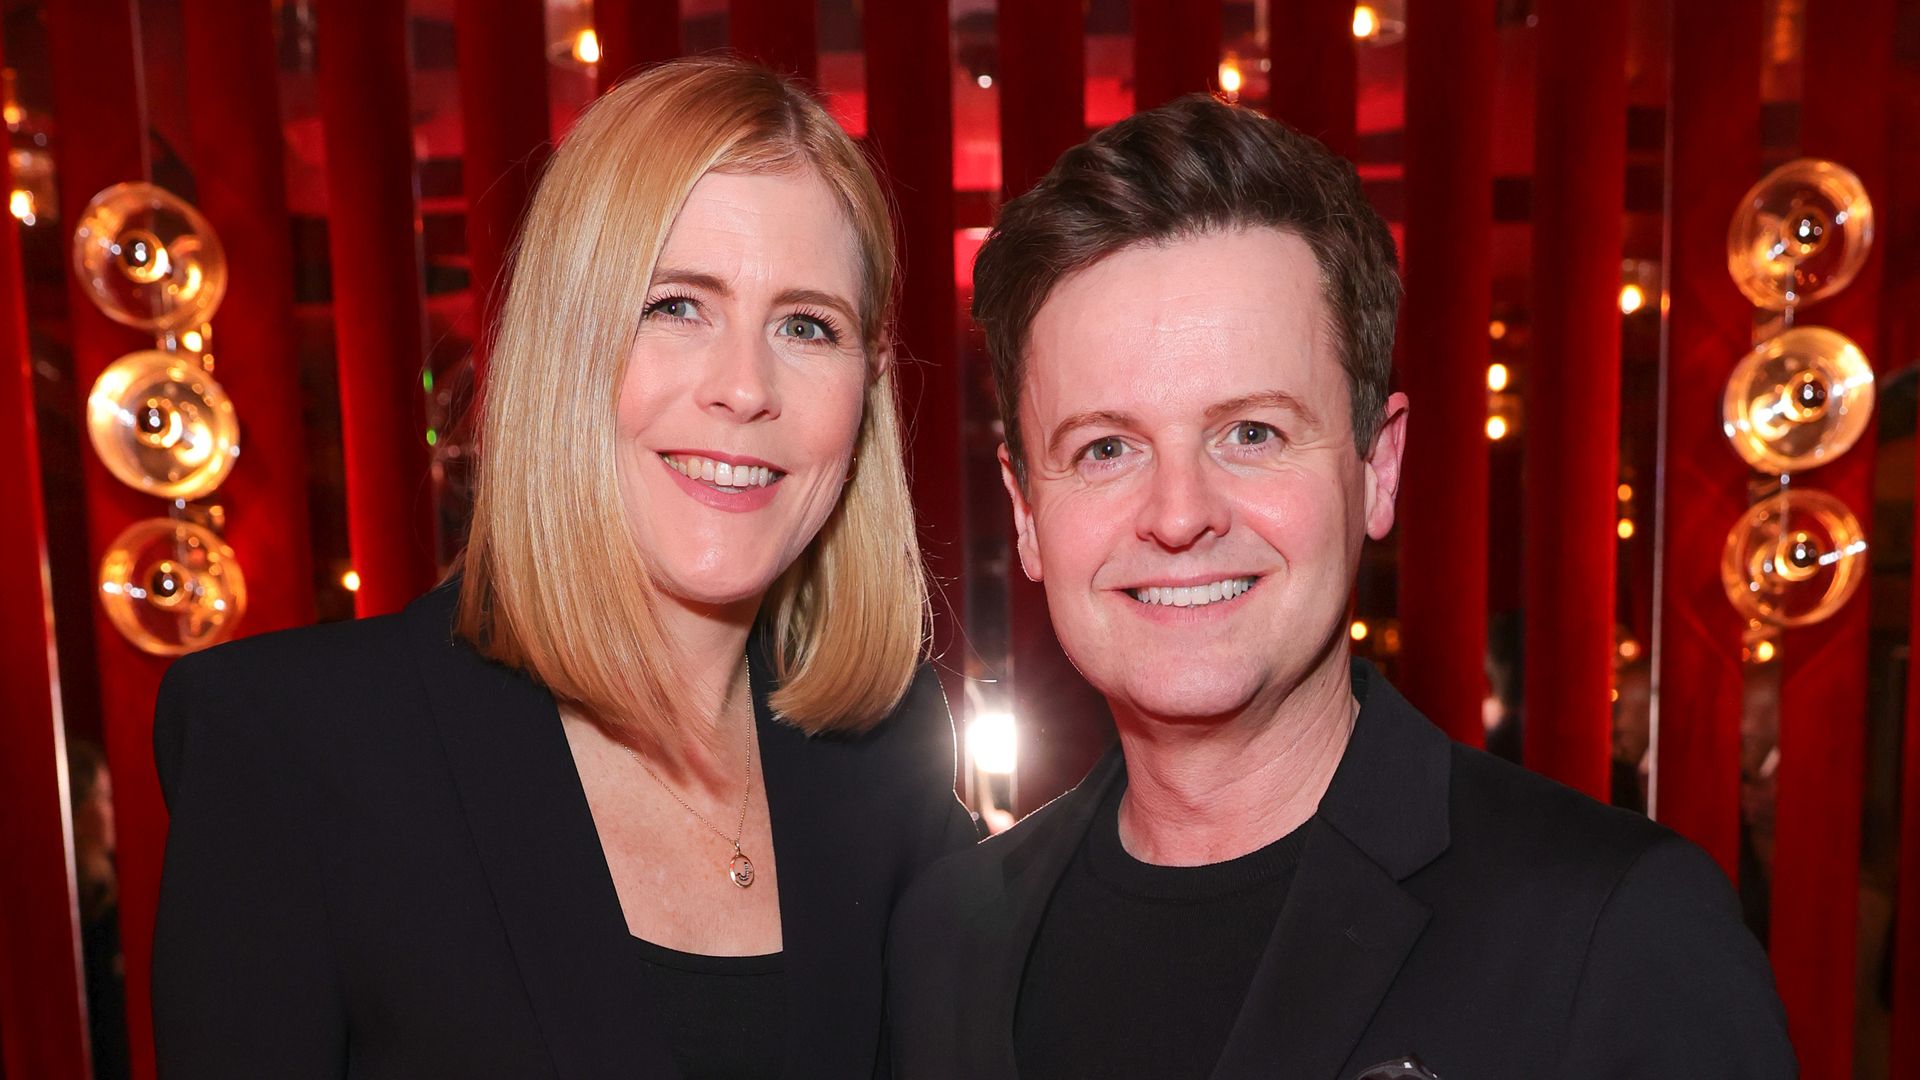 Ali Astall and Declan Donnelly attend Elizabeth Day's launch of new book Friendaholic â Confessions of a Friendship Addict at Langan's